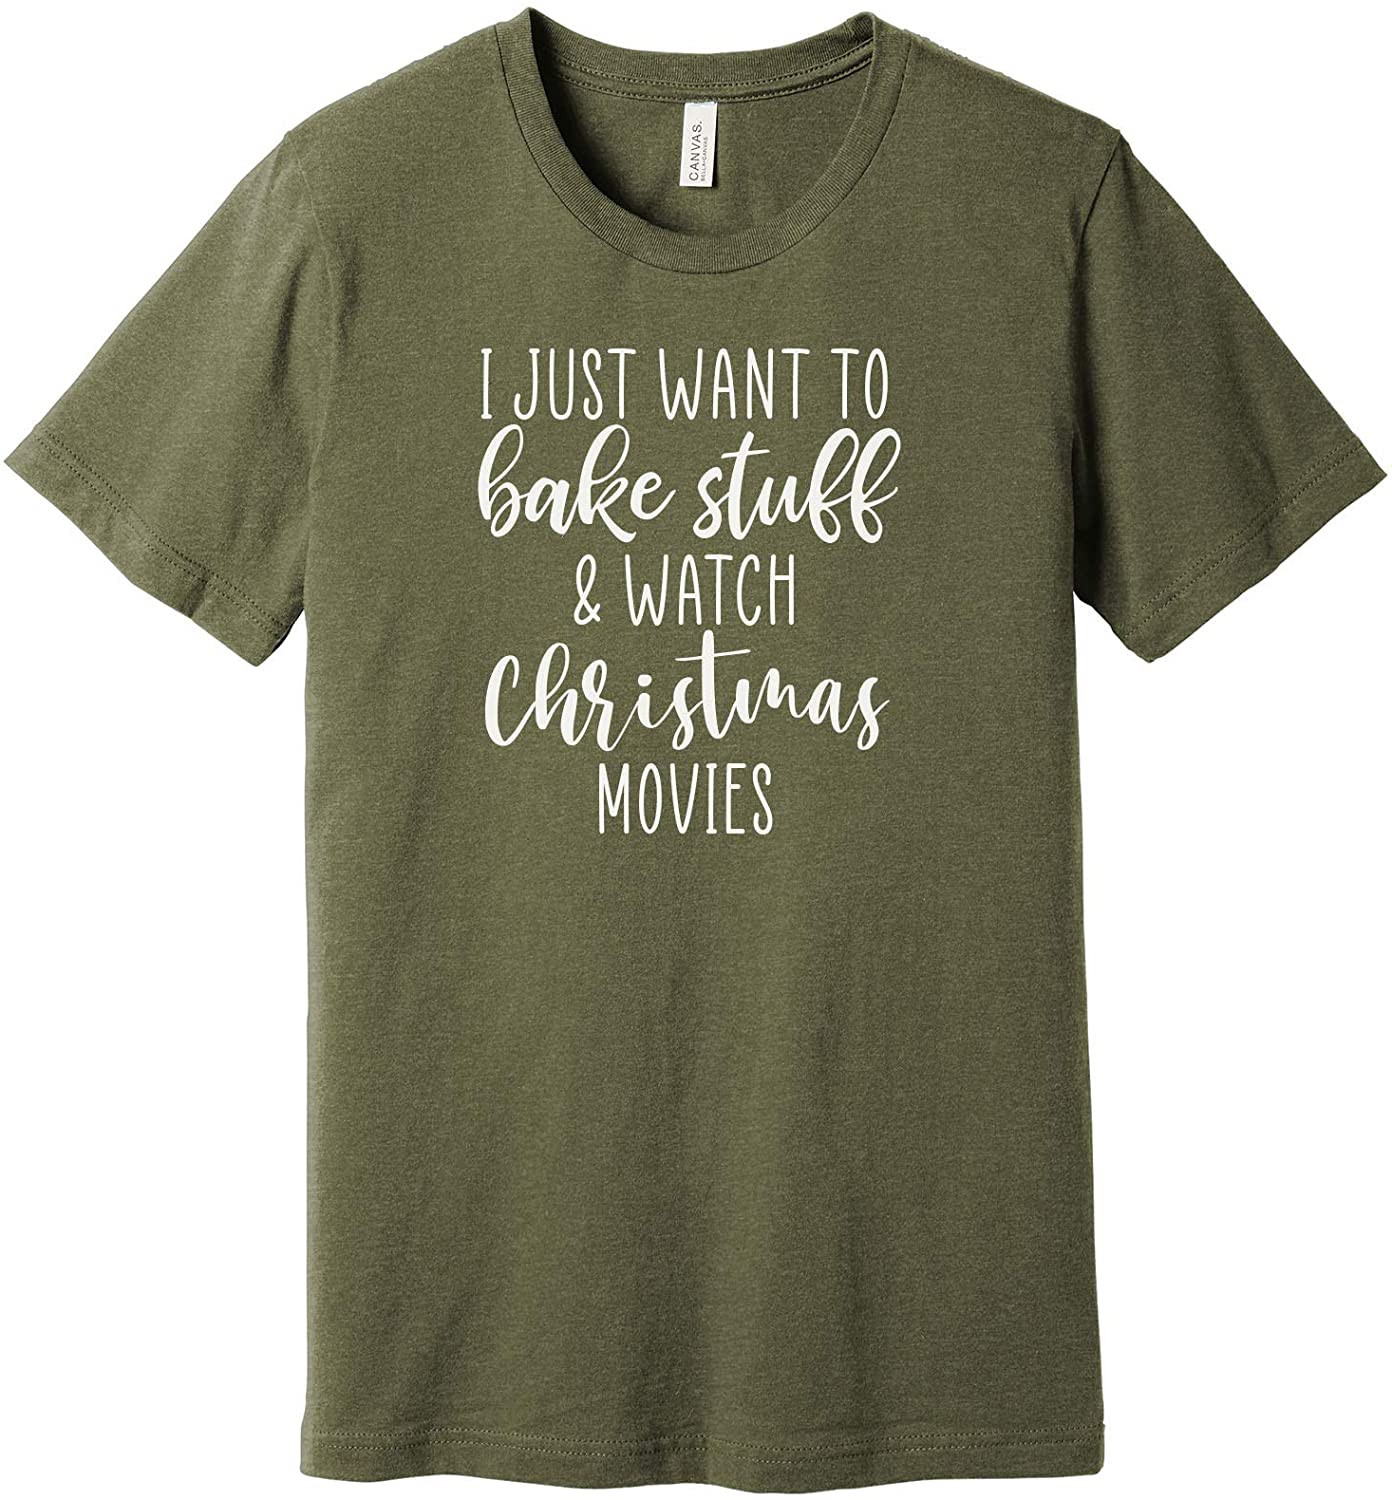 I Just Want To Bake Stuff And Watch Christmas Movies T-Shirt